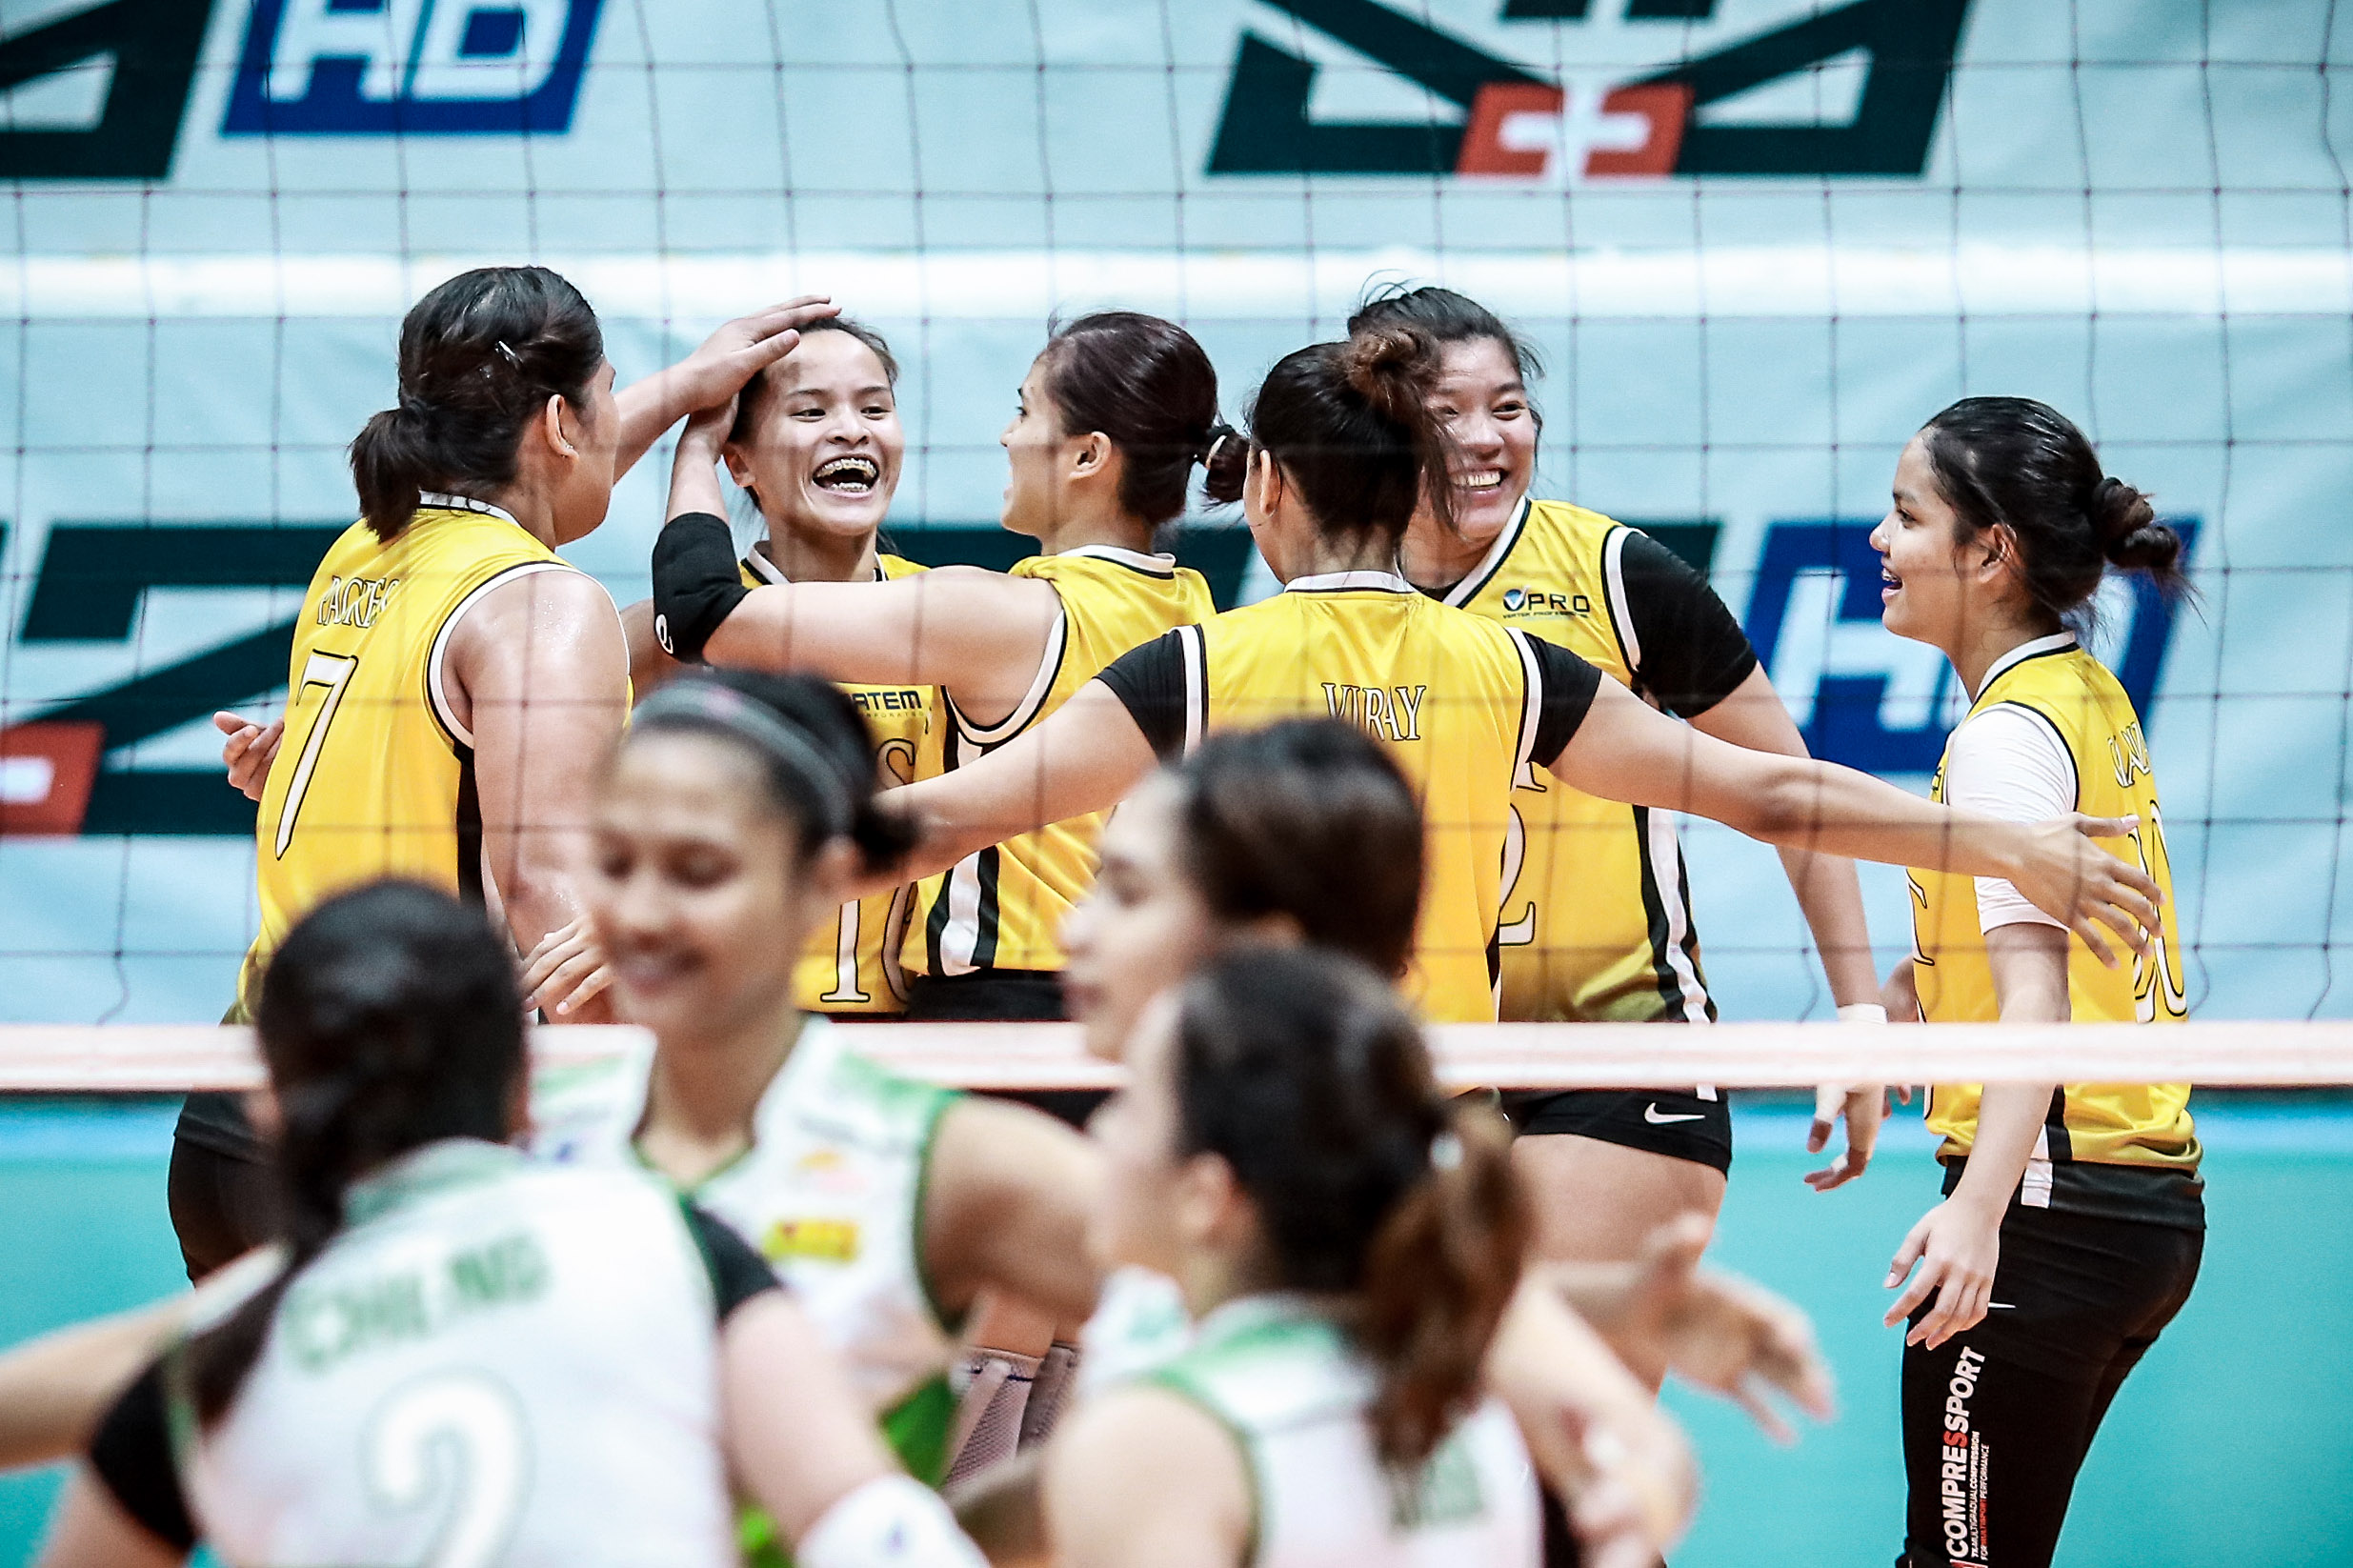 BIG WIN. The UST Golden Tigresses vow to be ready against any opponent, and they show just that against defending champion La Salle. Photo by Michael Gatpandan/Rappler  